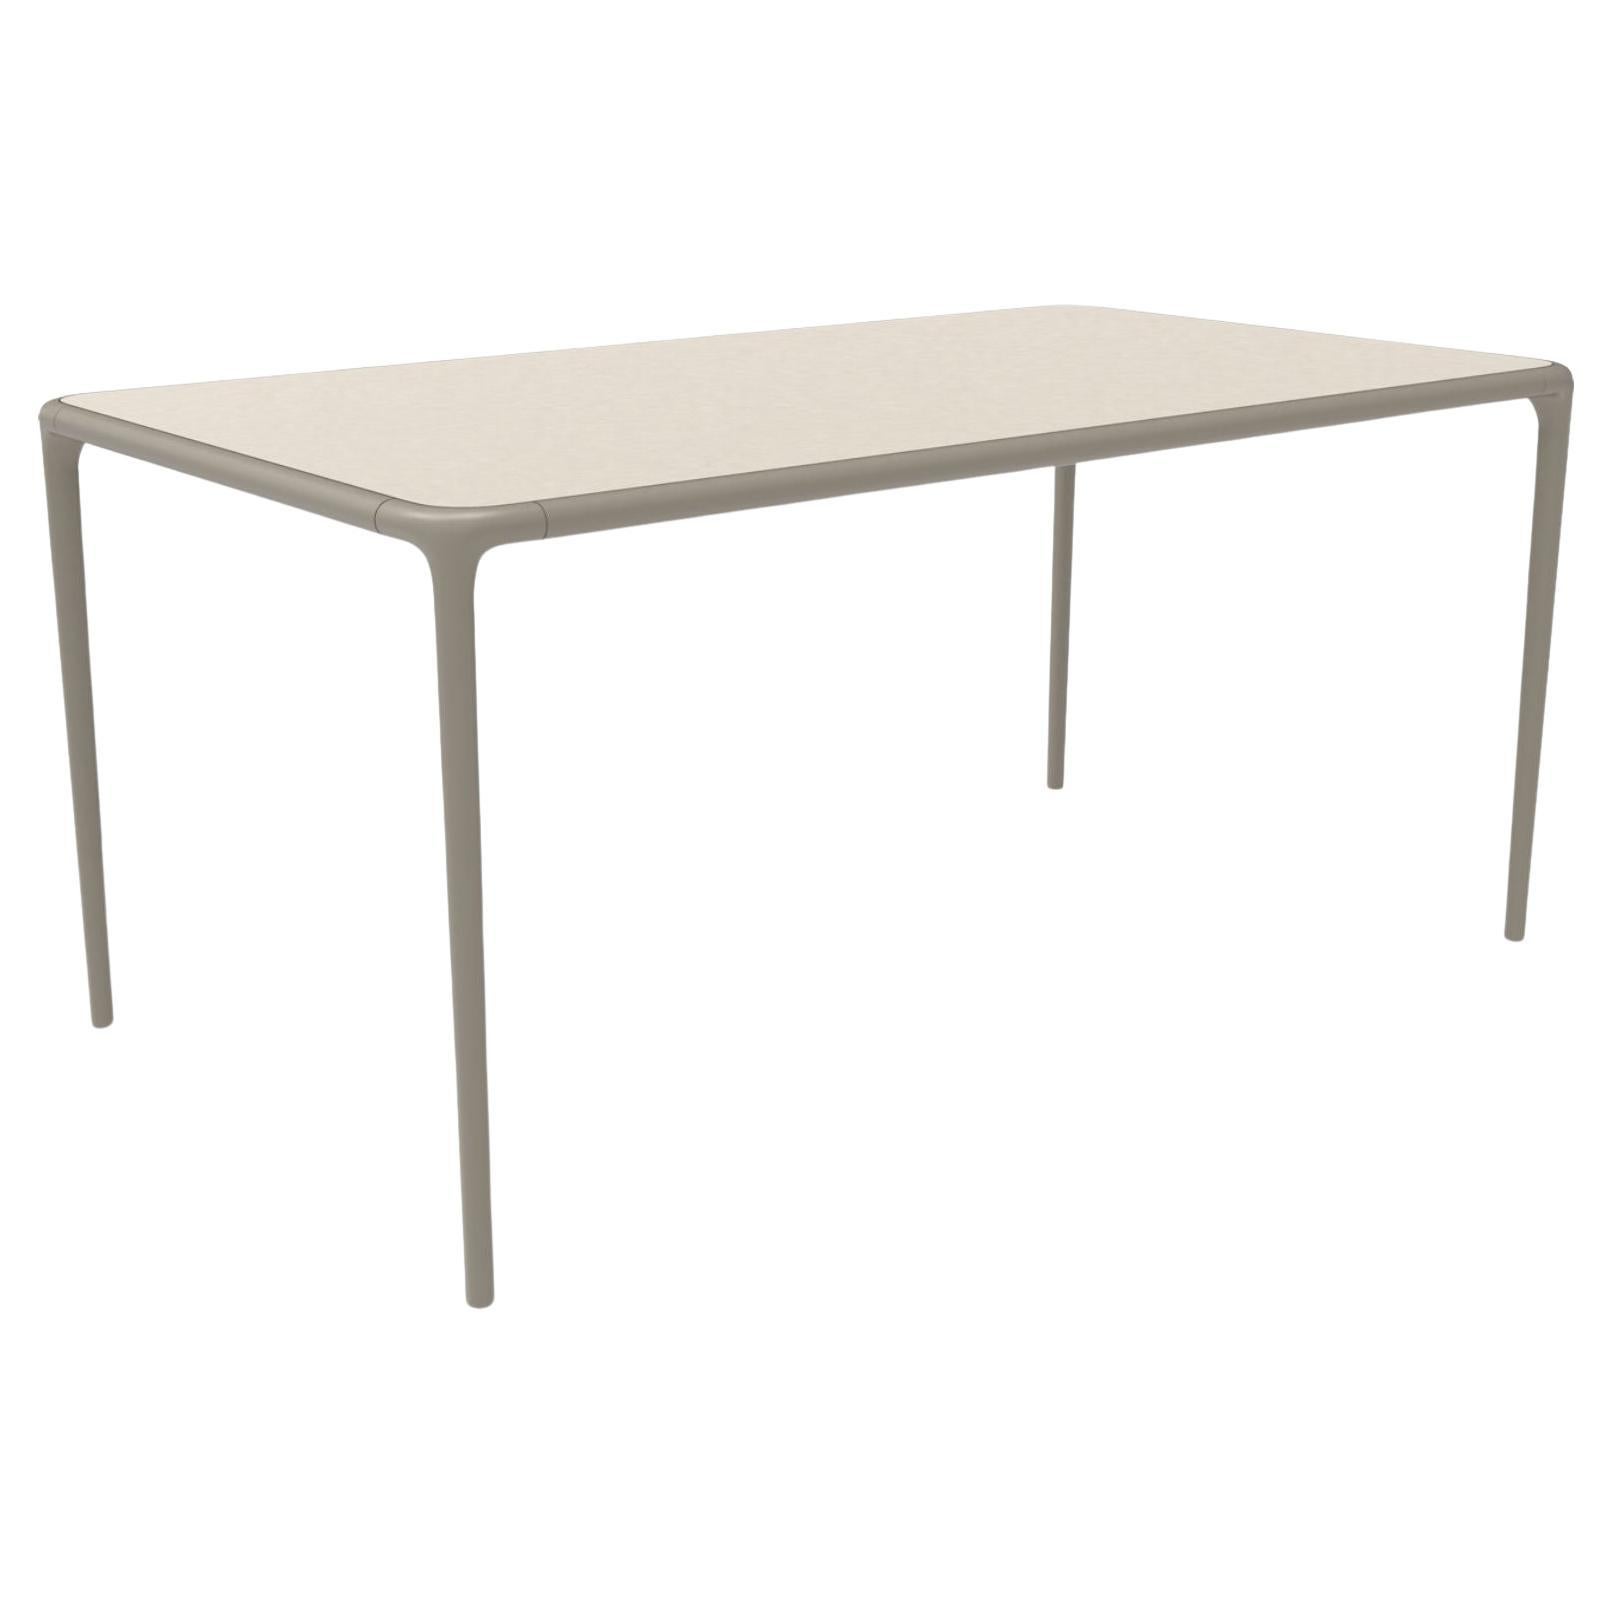 Xaloc Cream Glass Top Table 160 by Mowee For Sale